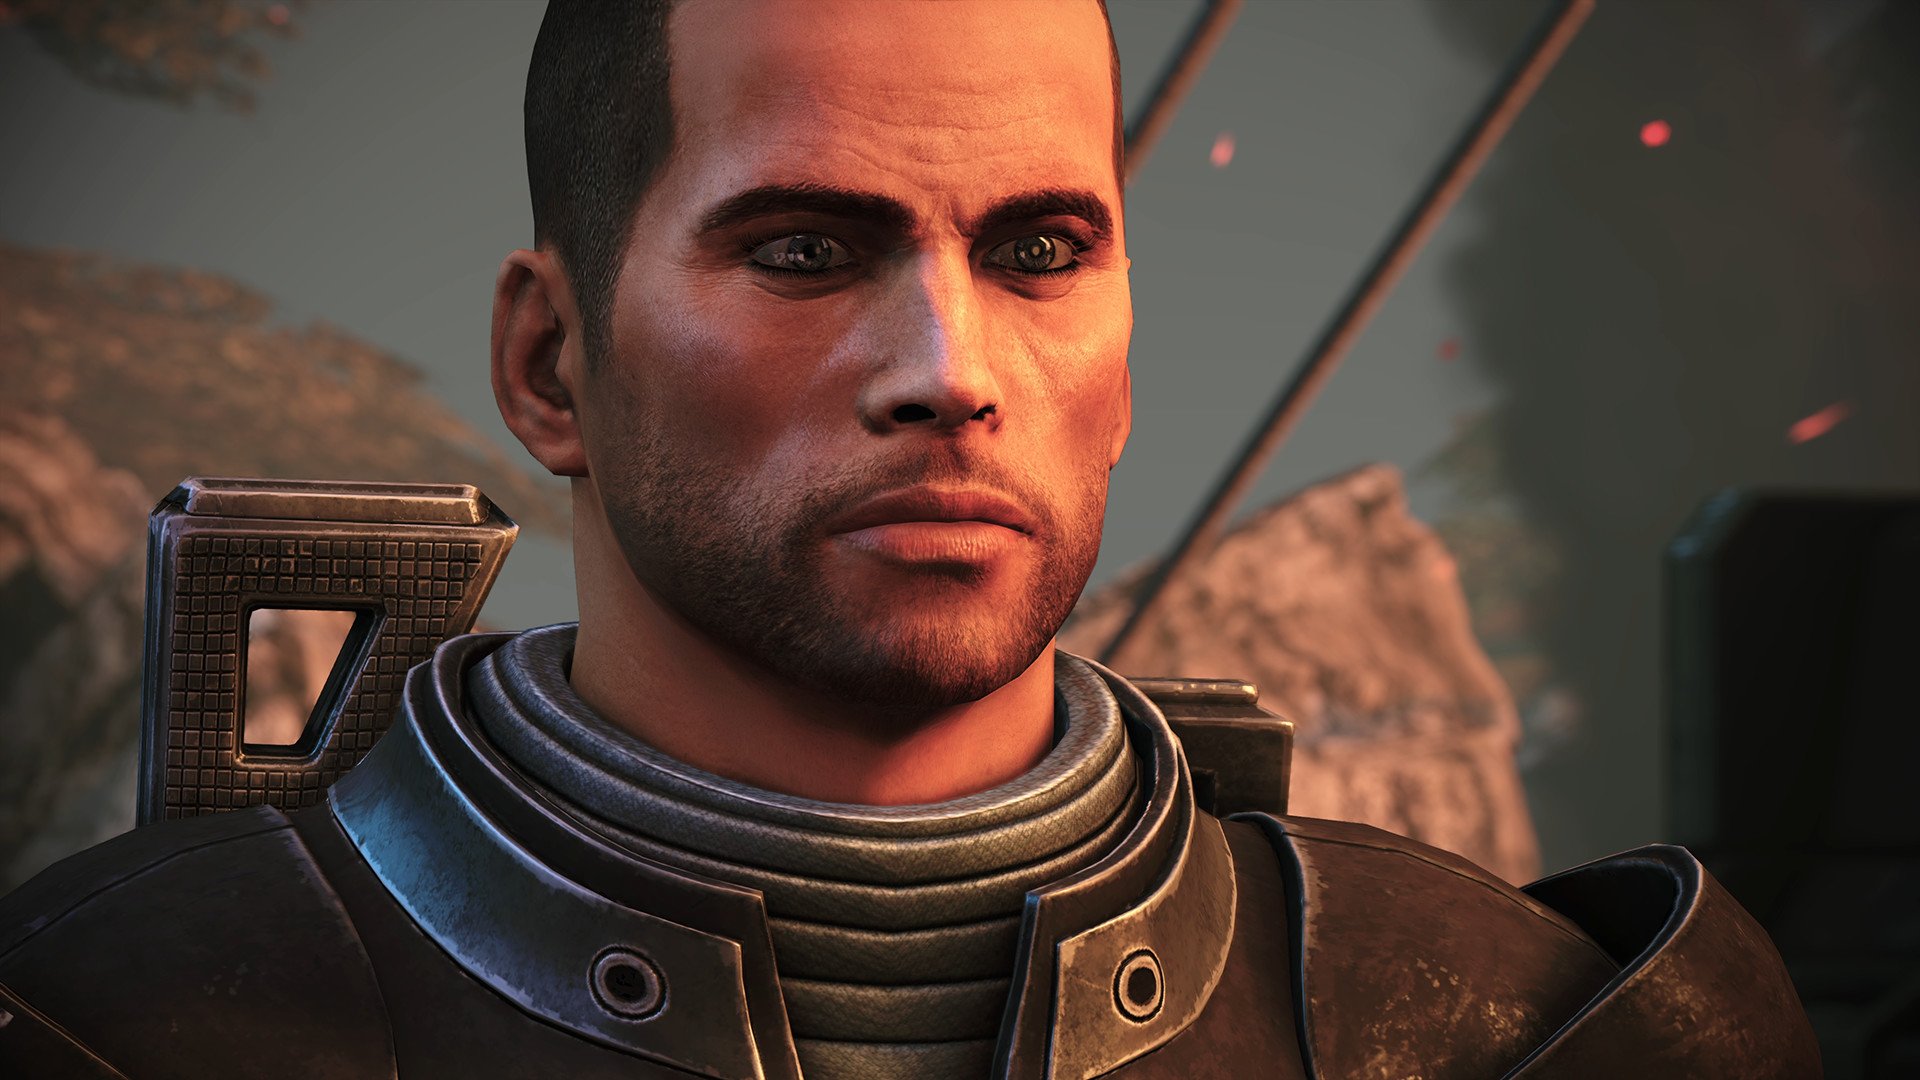 Mass Effect Trilogy free with Amazon Prime this July